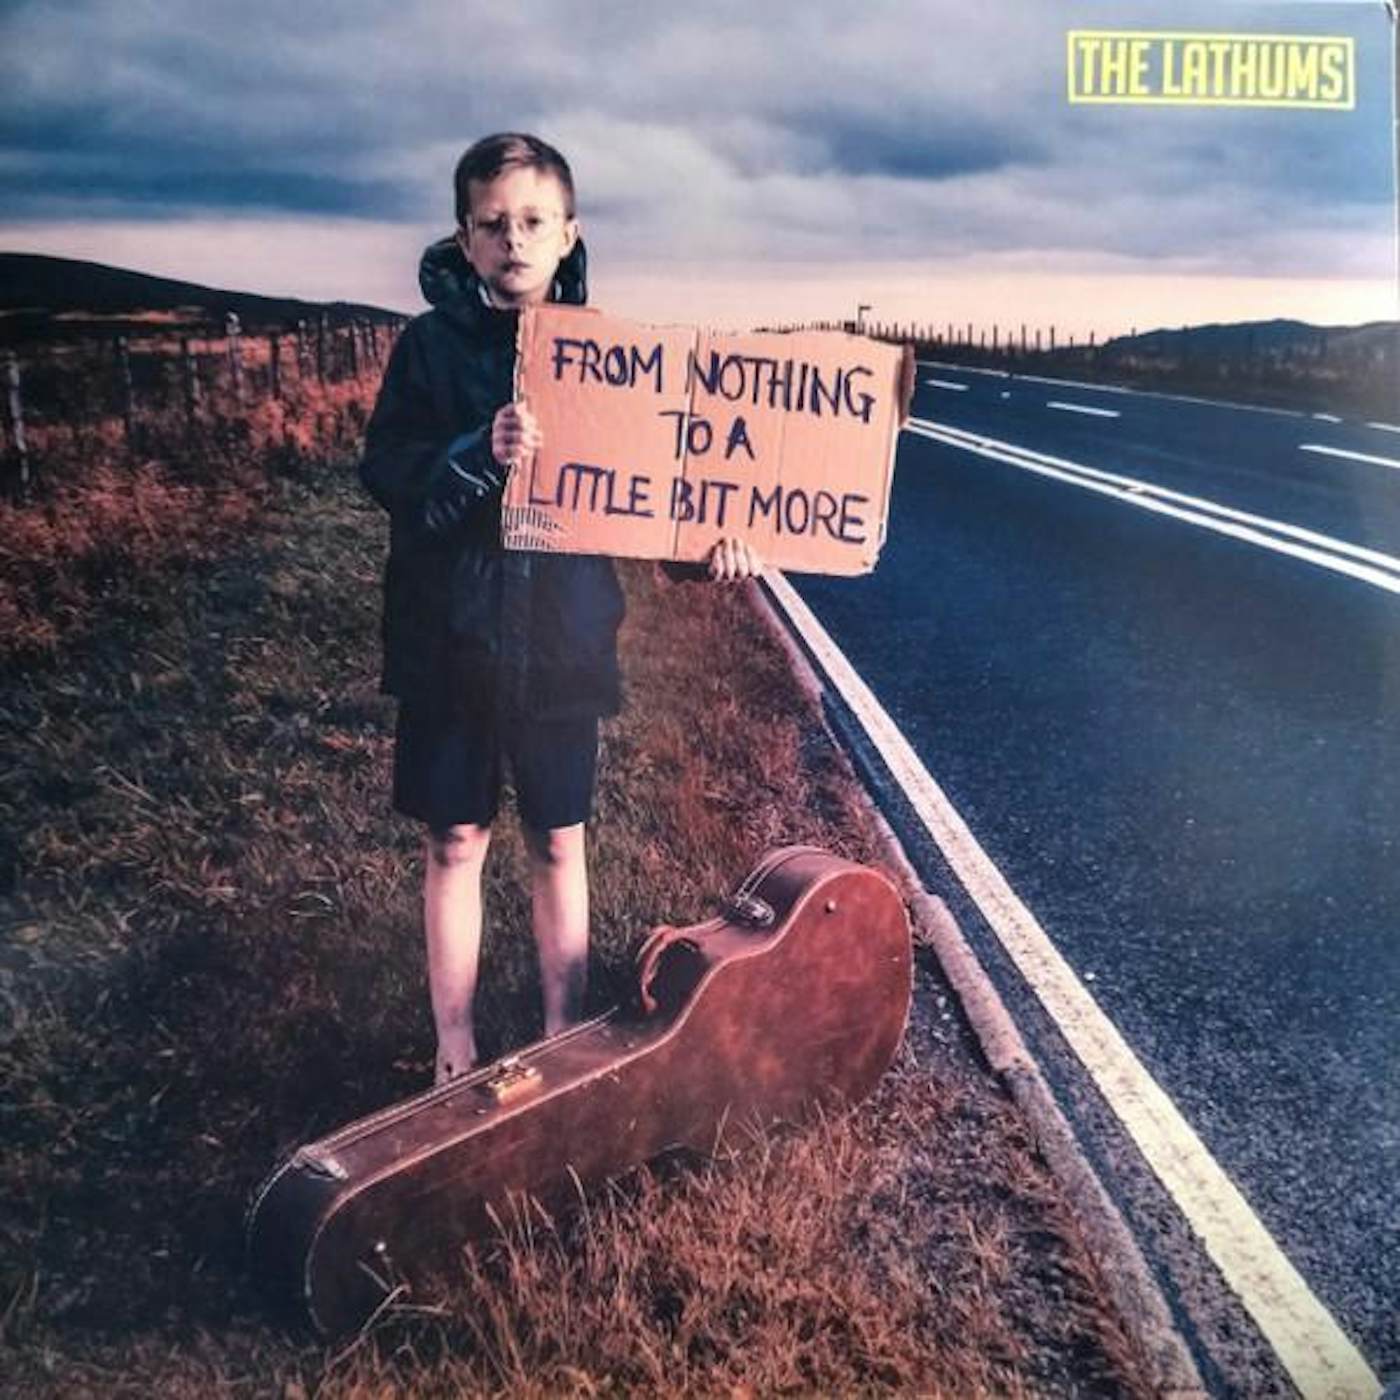 The Lathums From Nothing To A Little Bit More Vinyl Record